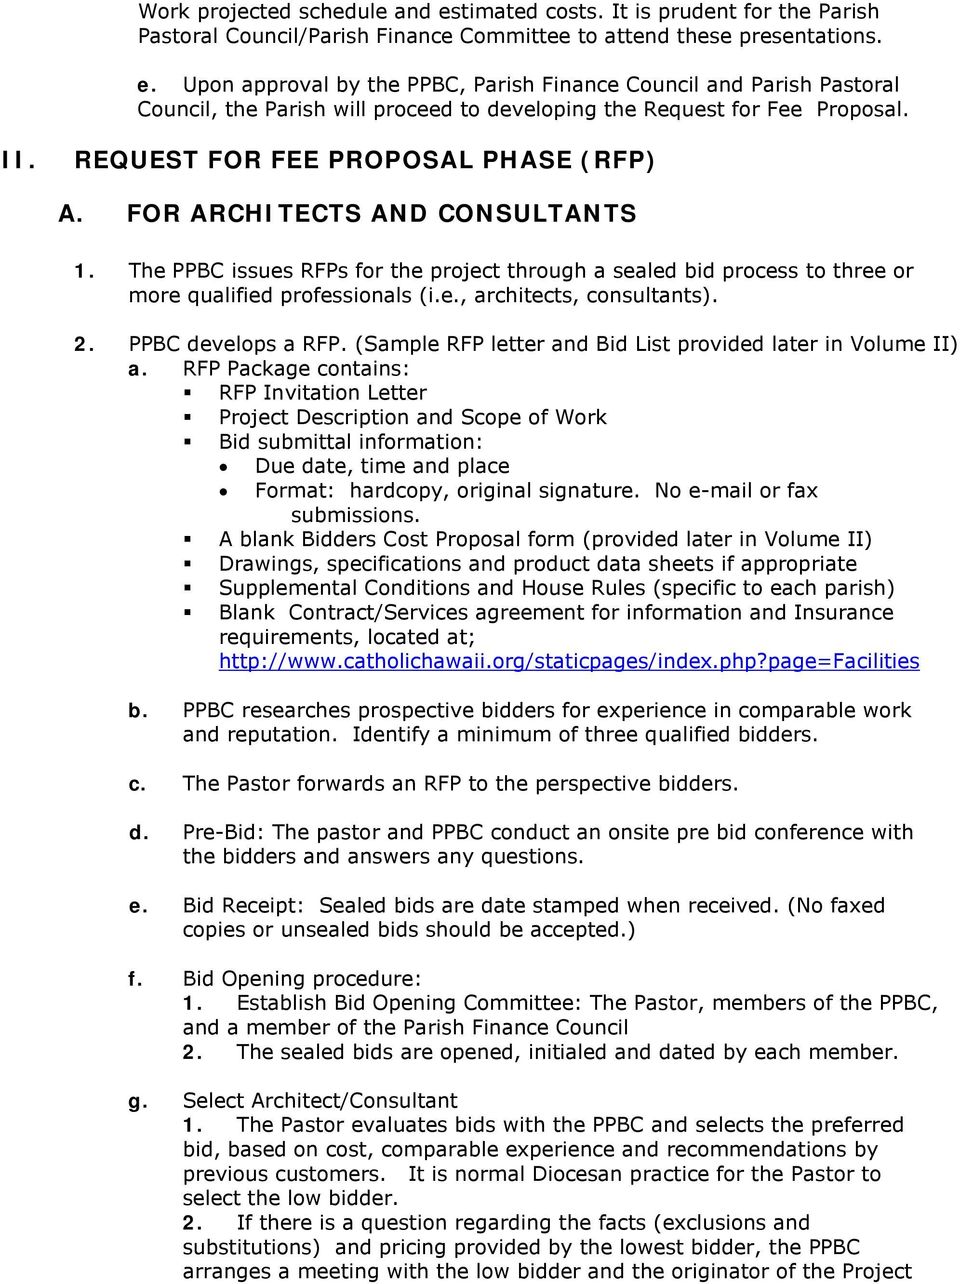 2. PPBC develops a RFP. (Sample RFP letter and Bid List provided later in Volume II) a.